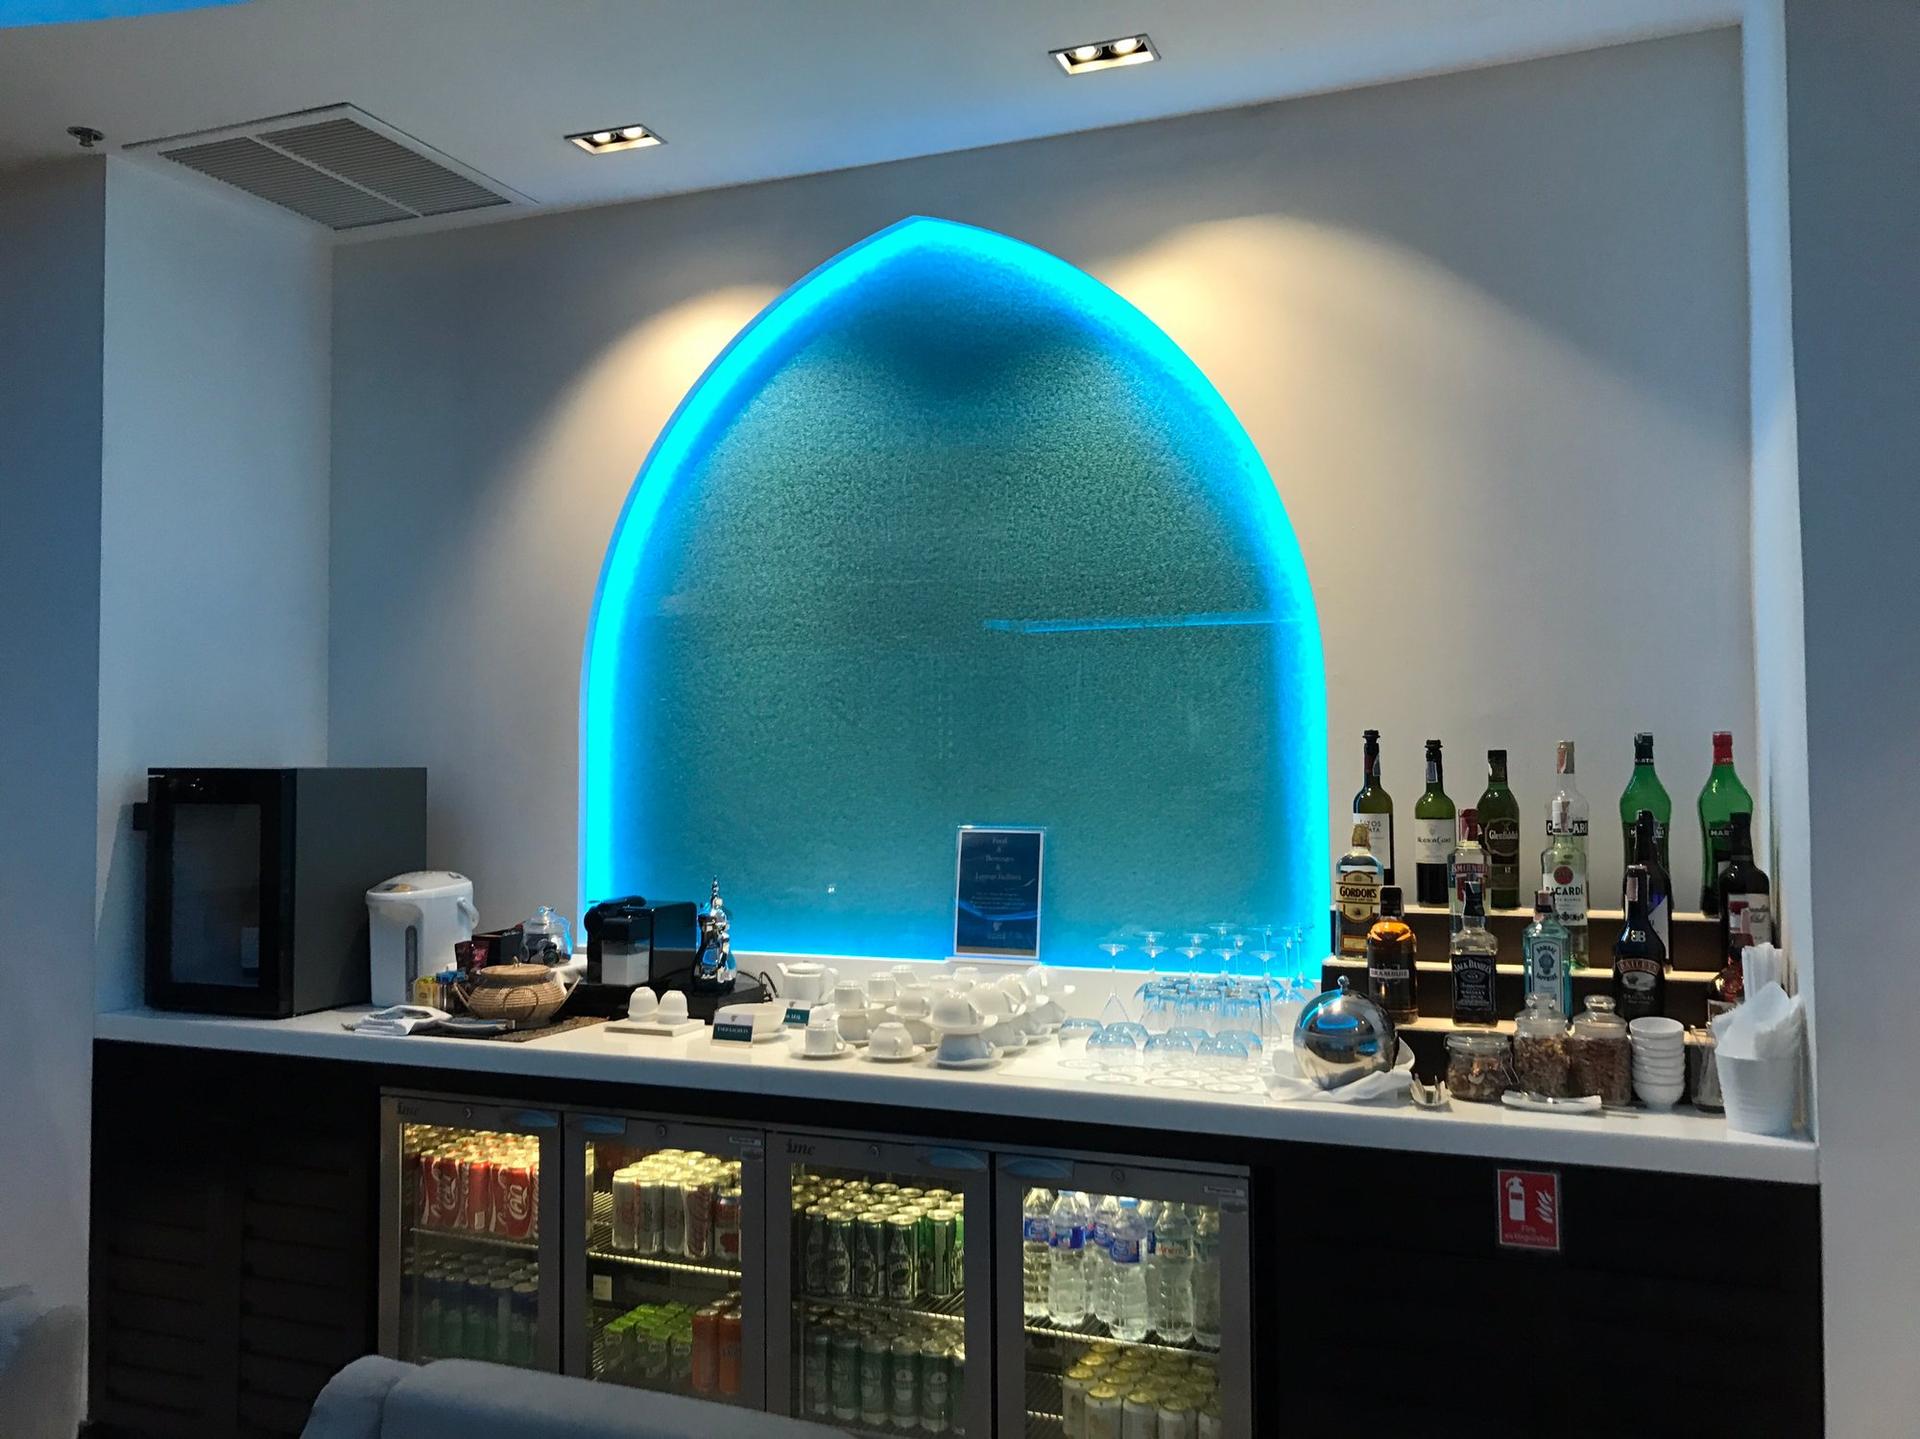 Oman Air First and Business Class Lounge image 15 of 50